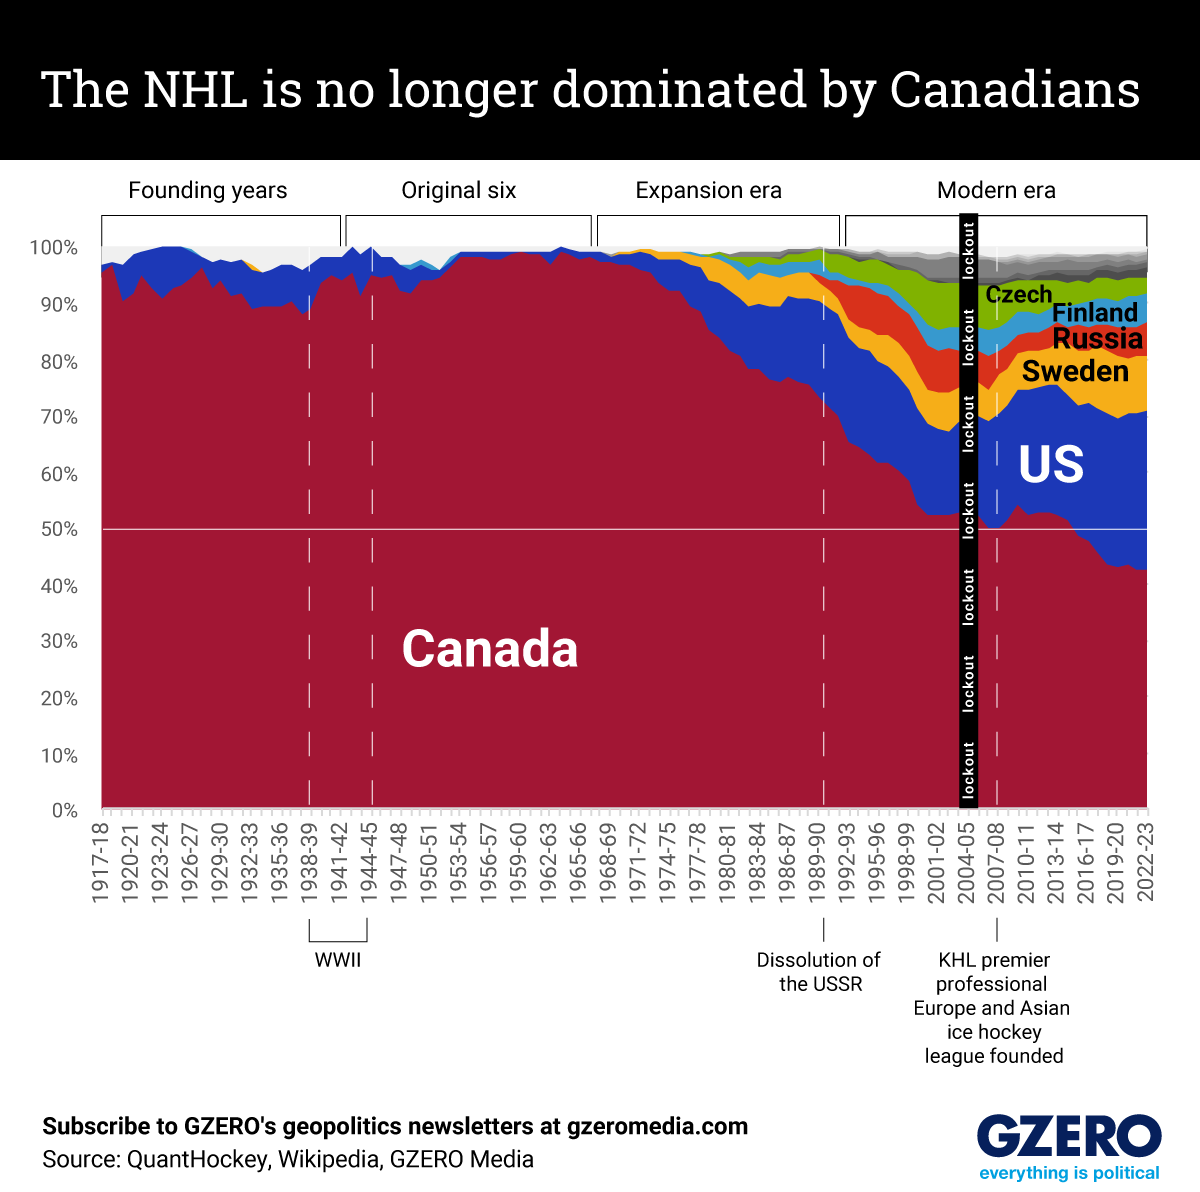 The Graphic Truth: The NHL is no longer dominated by Canadians